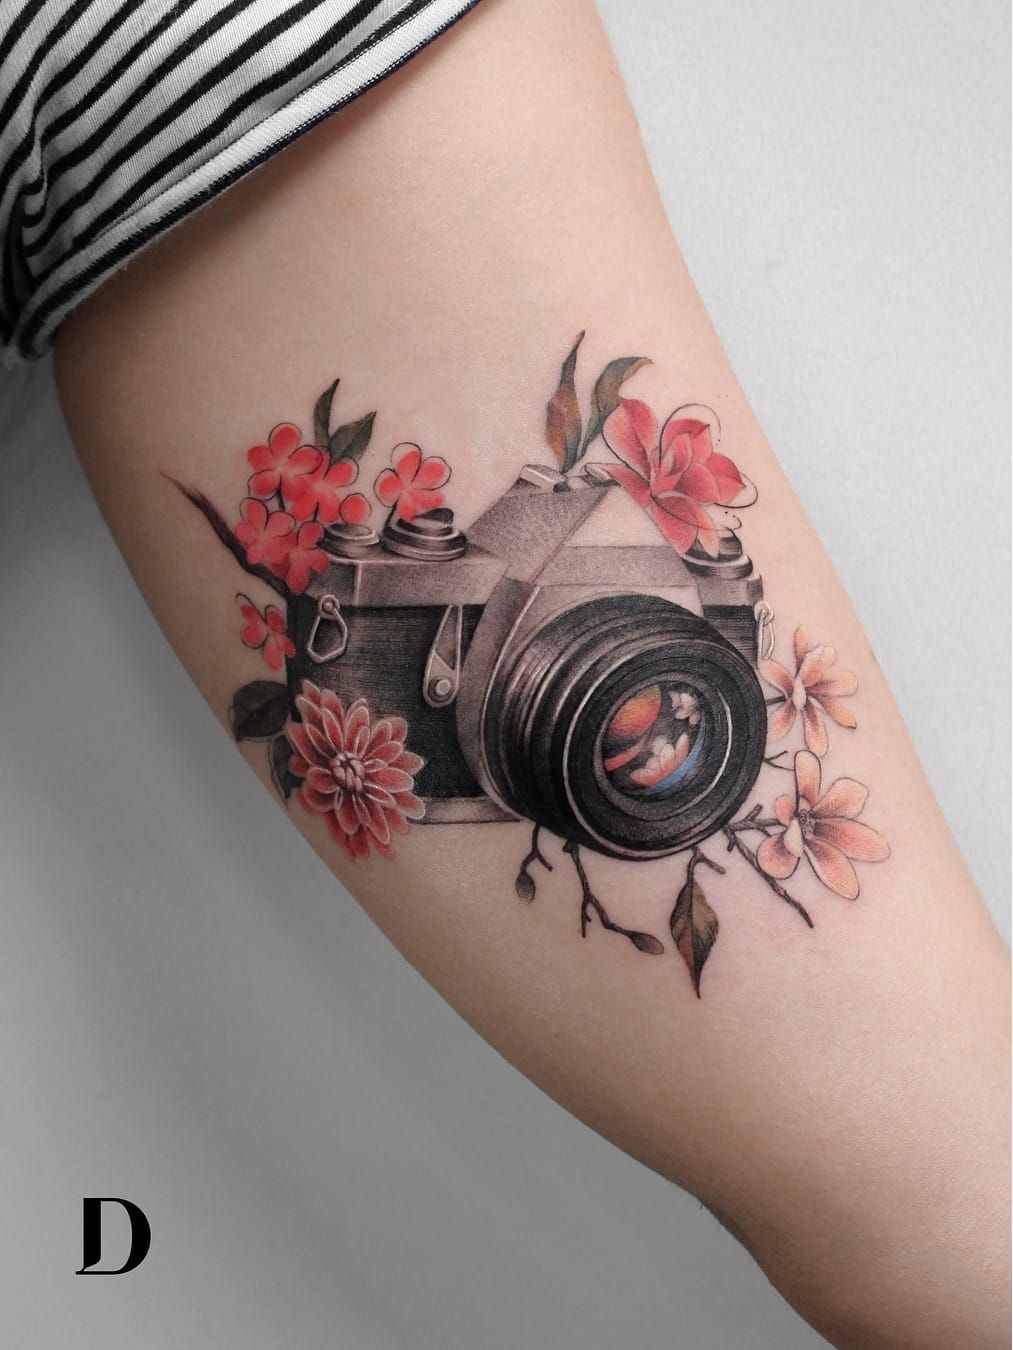 Tattoo uploaded by Deborah Genchi • Beautiful tattoo by Deborah Genchi  #DeborahGenchi #debartist #realism #realistic #illustrative #watercolor  #color #camera #flowers #floral #35mm #analogfilm #upperarm #arm • Tattoodo